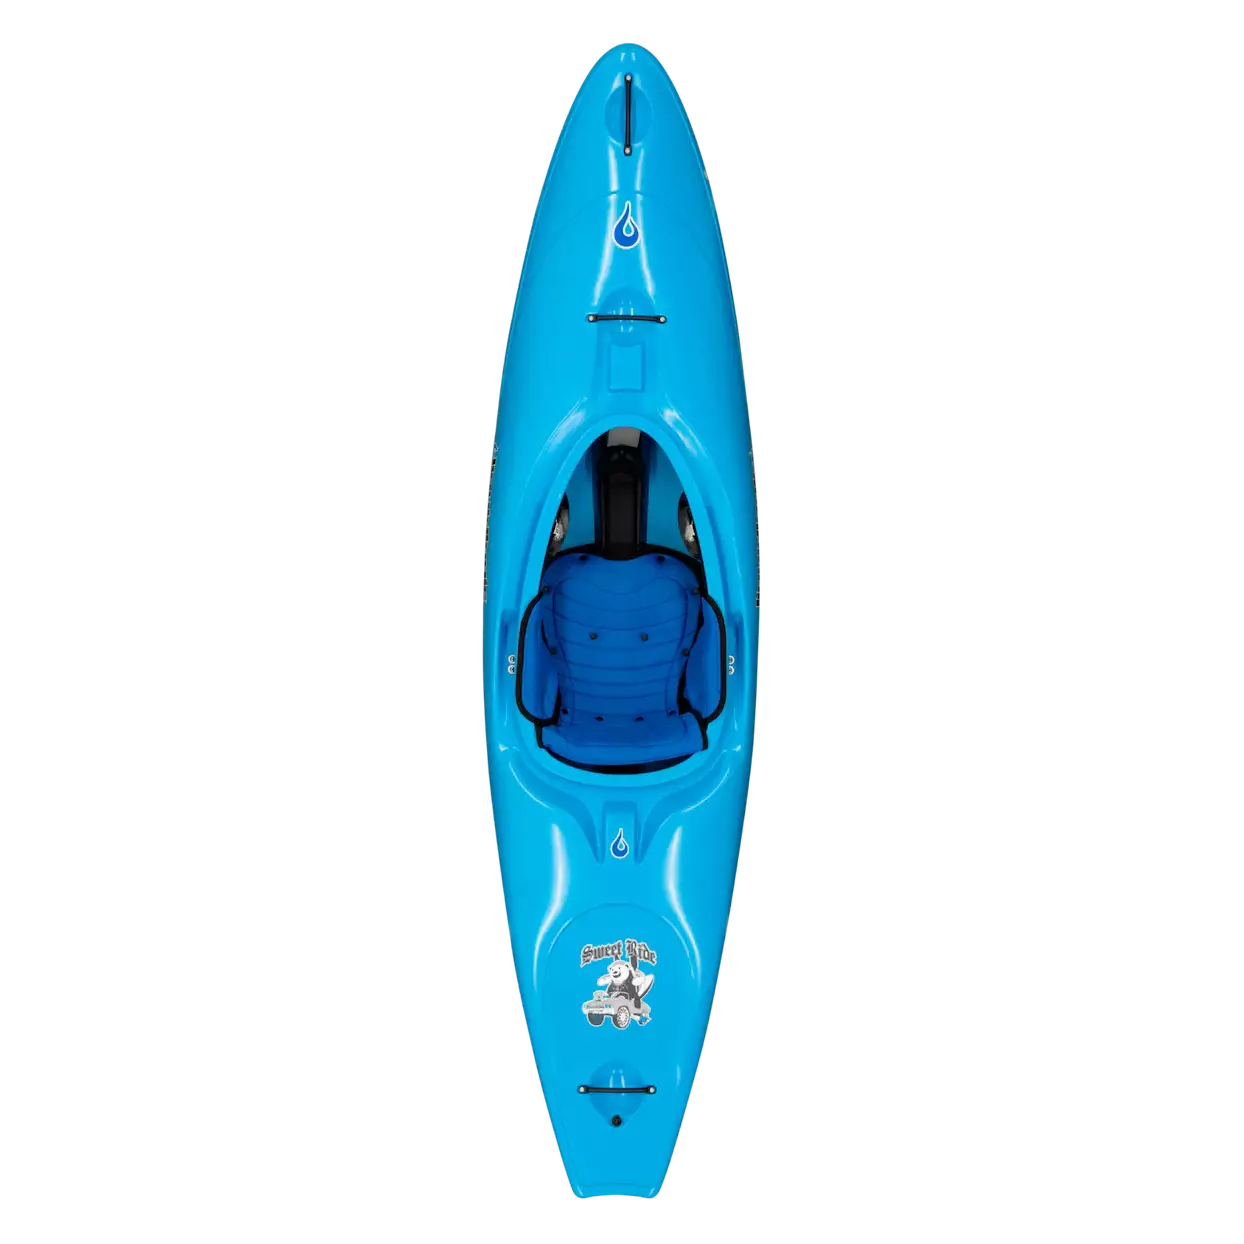 Featuring the Sweet Ride new, play boat, pre-order, river runner kayak manufactured by LiquidLogic shown here from a third angle.